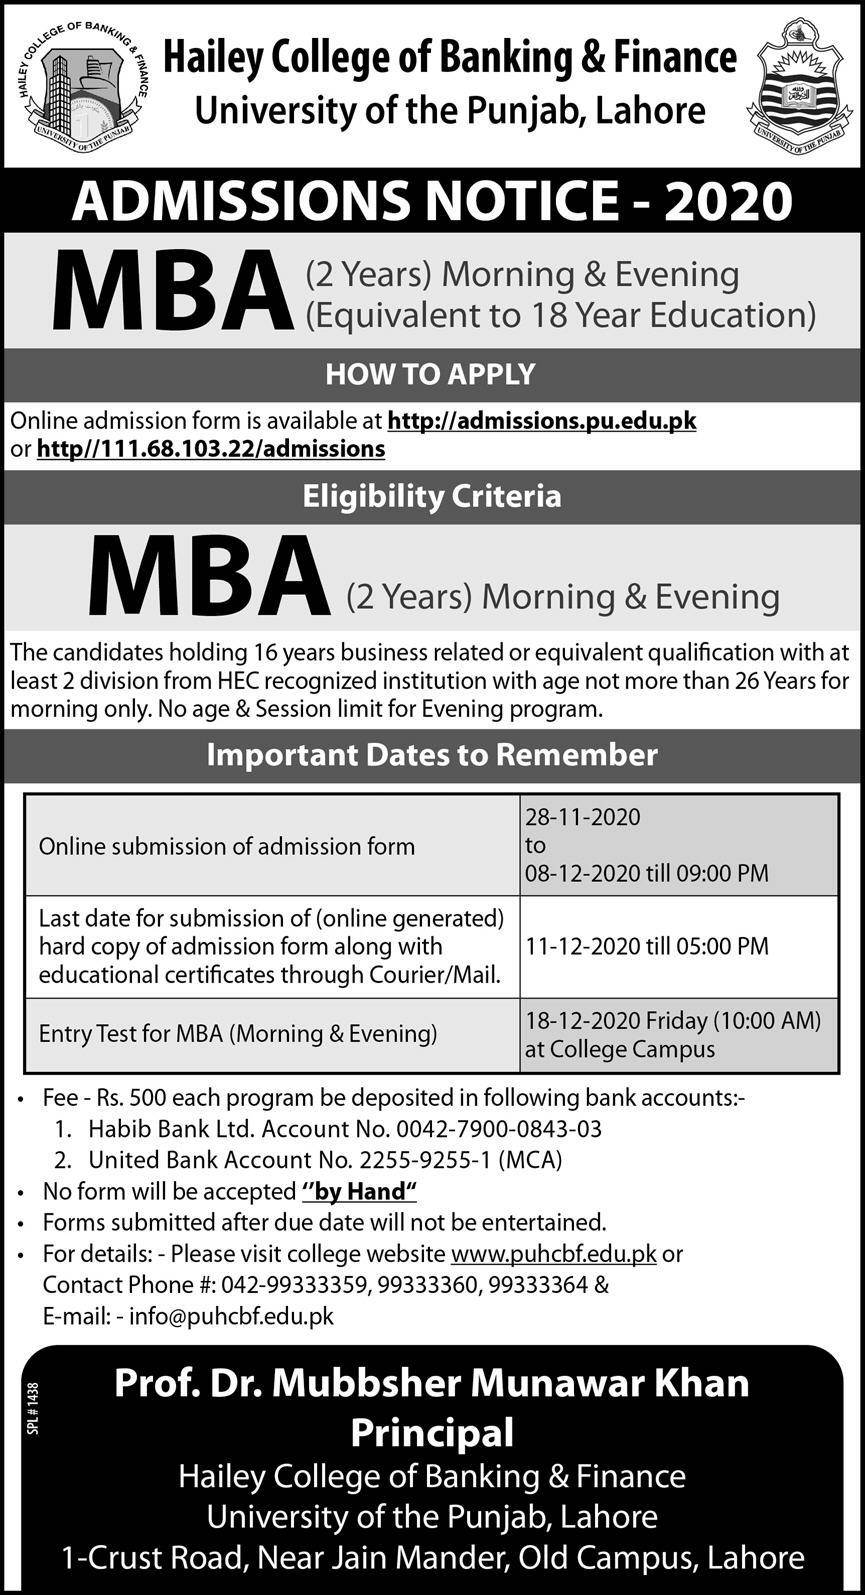 Hailey College of Banking & Finance MBA Evening Admission 2020